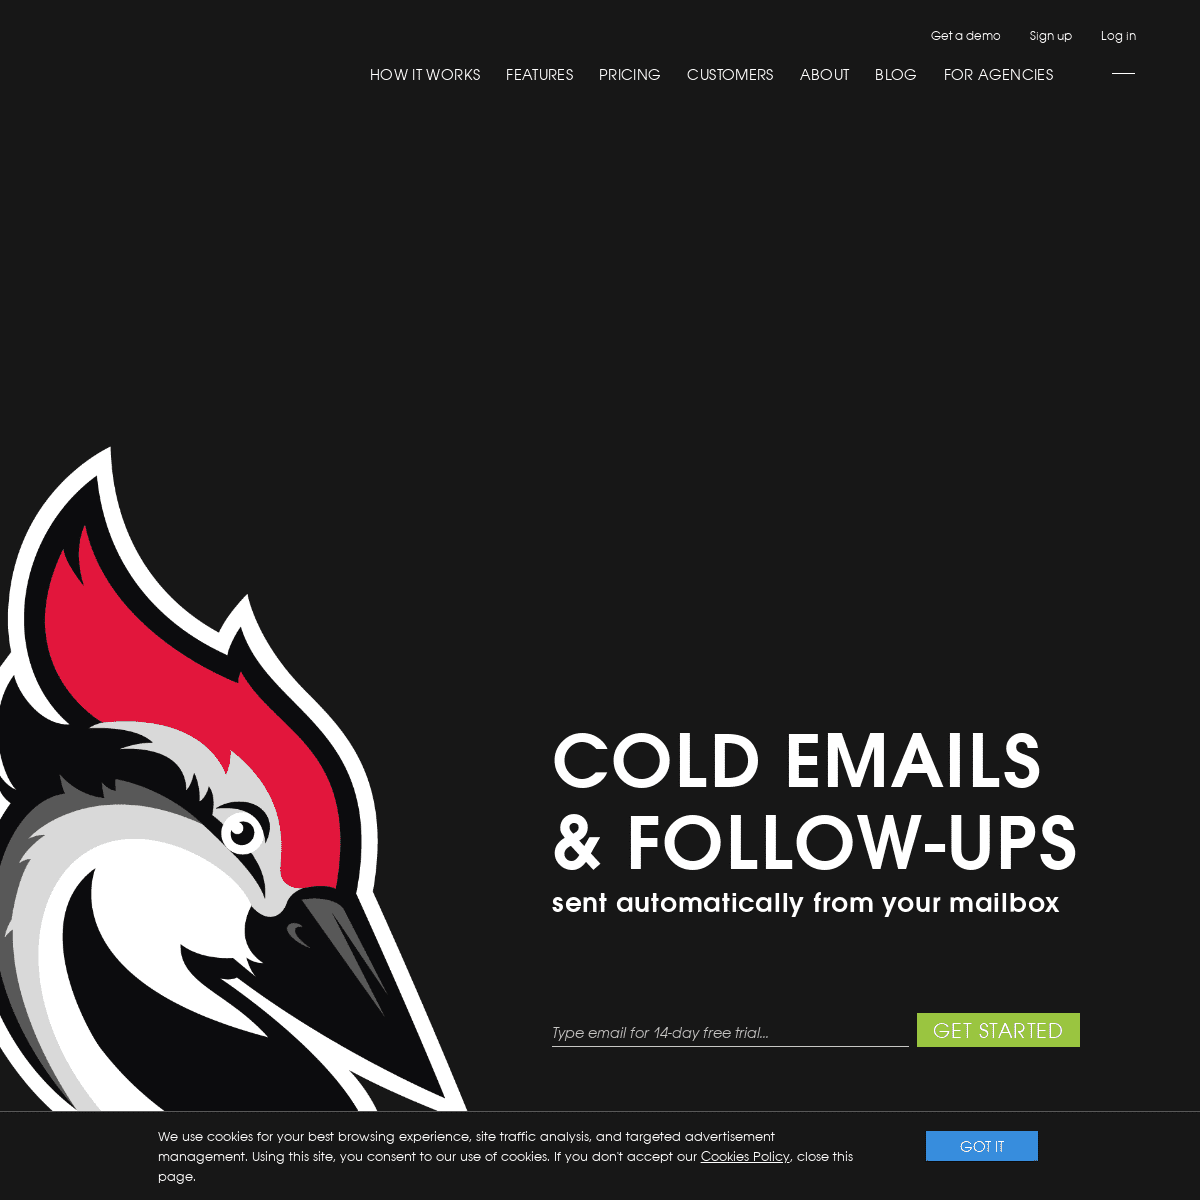 Woodpecker.co - Cold emails & follow-ups, sent automatically from your mailbox